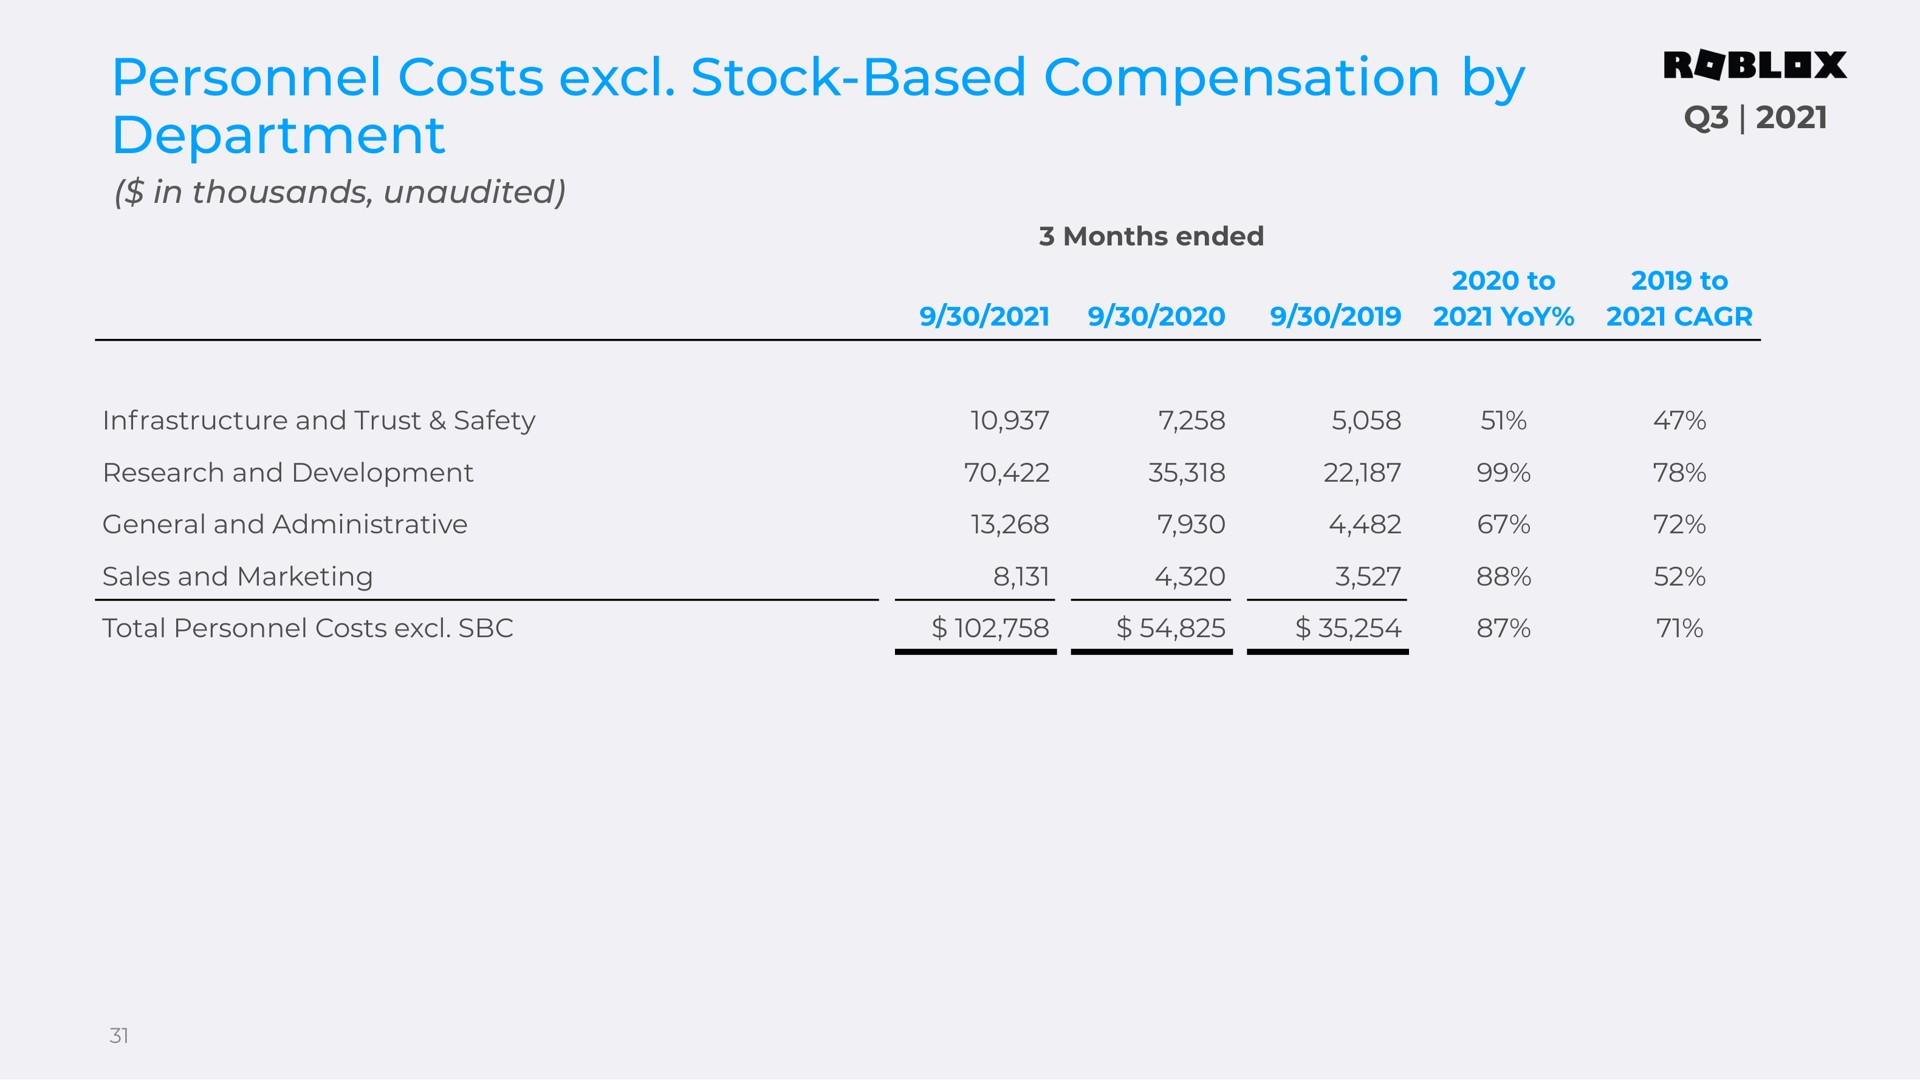 personnel costs stock based compensation by department reviewed | Roblox